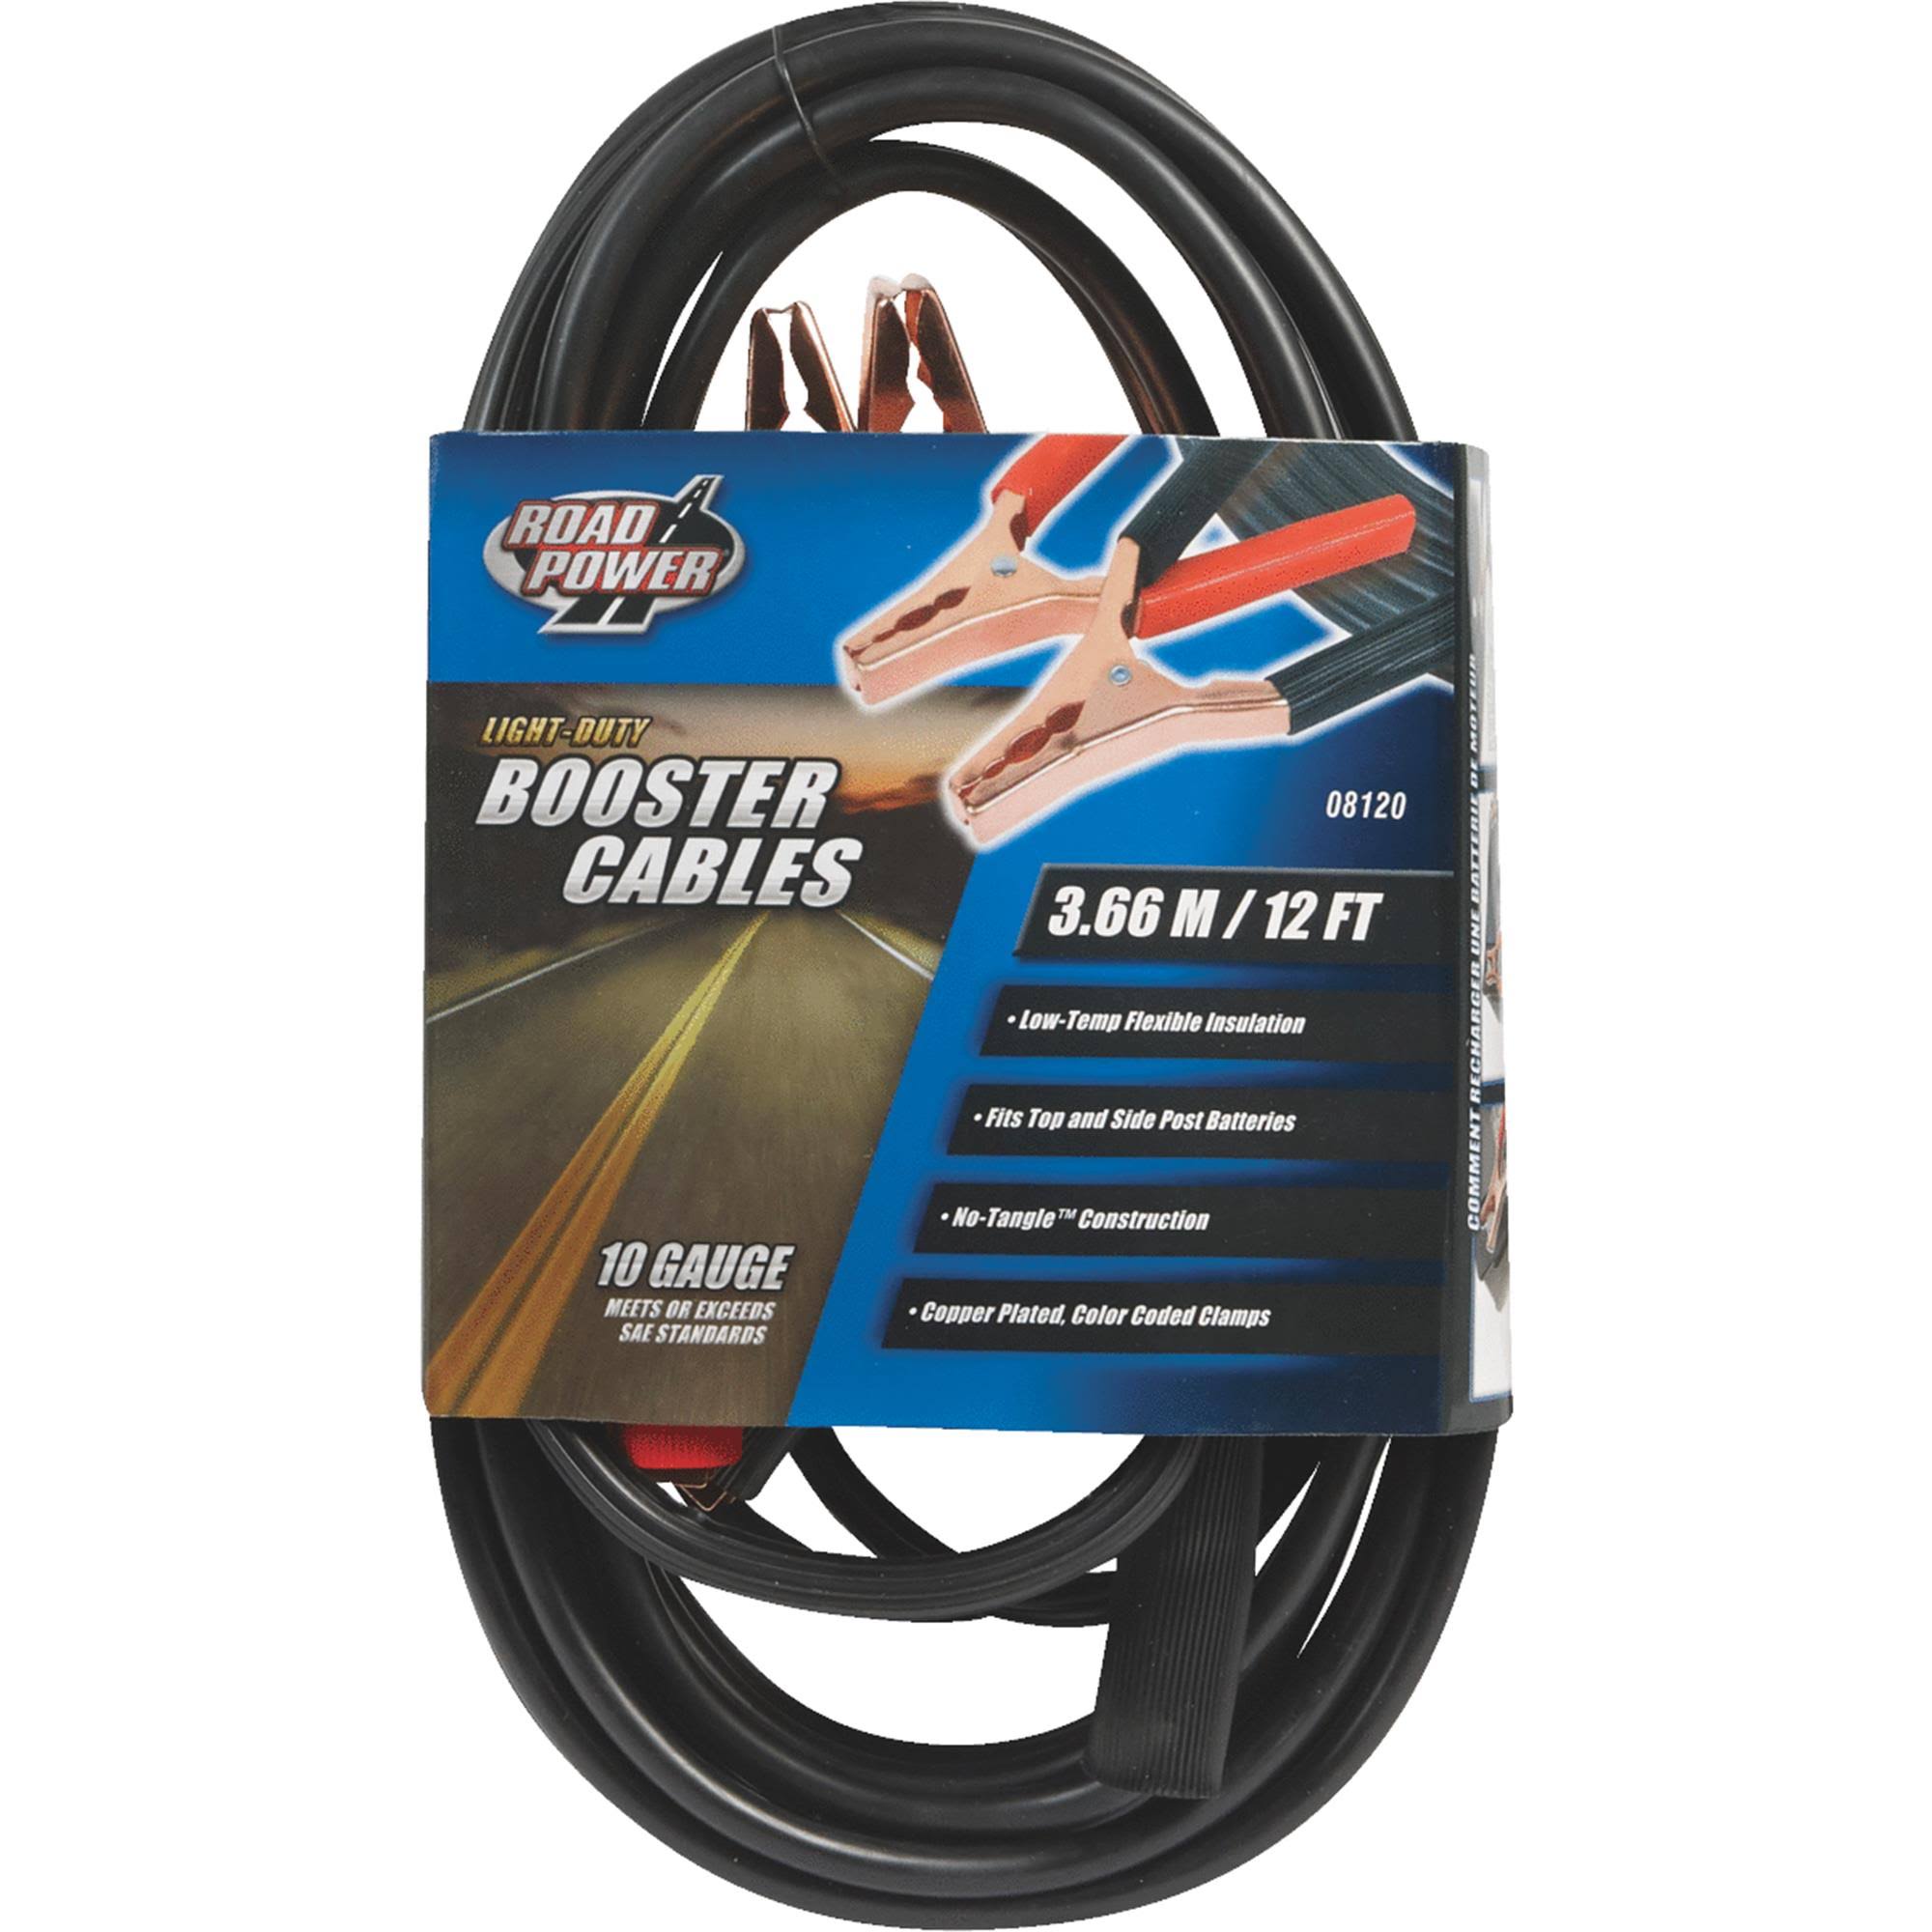 Coleman Cable Road Power Booster Cables, Light-Duty, 12 Feet